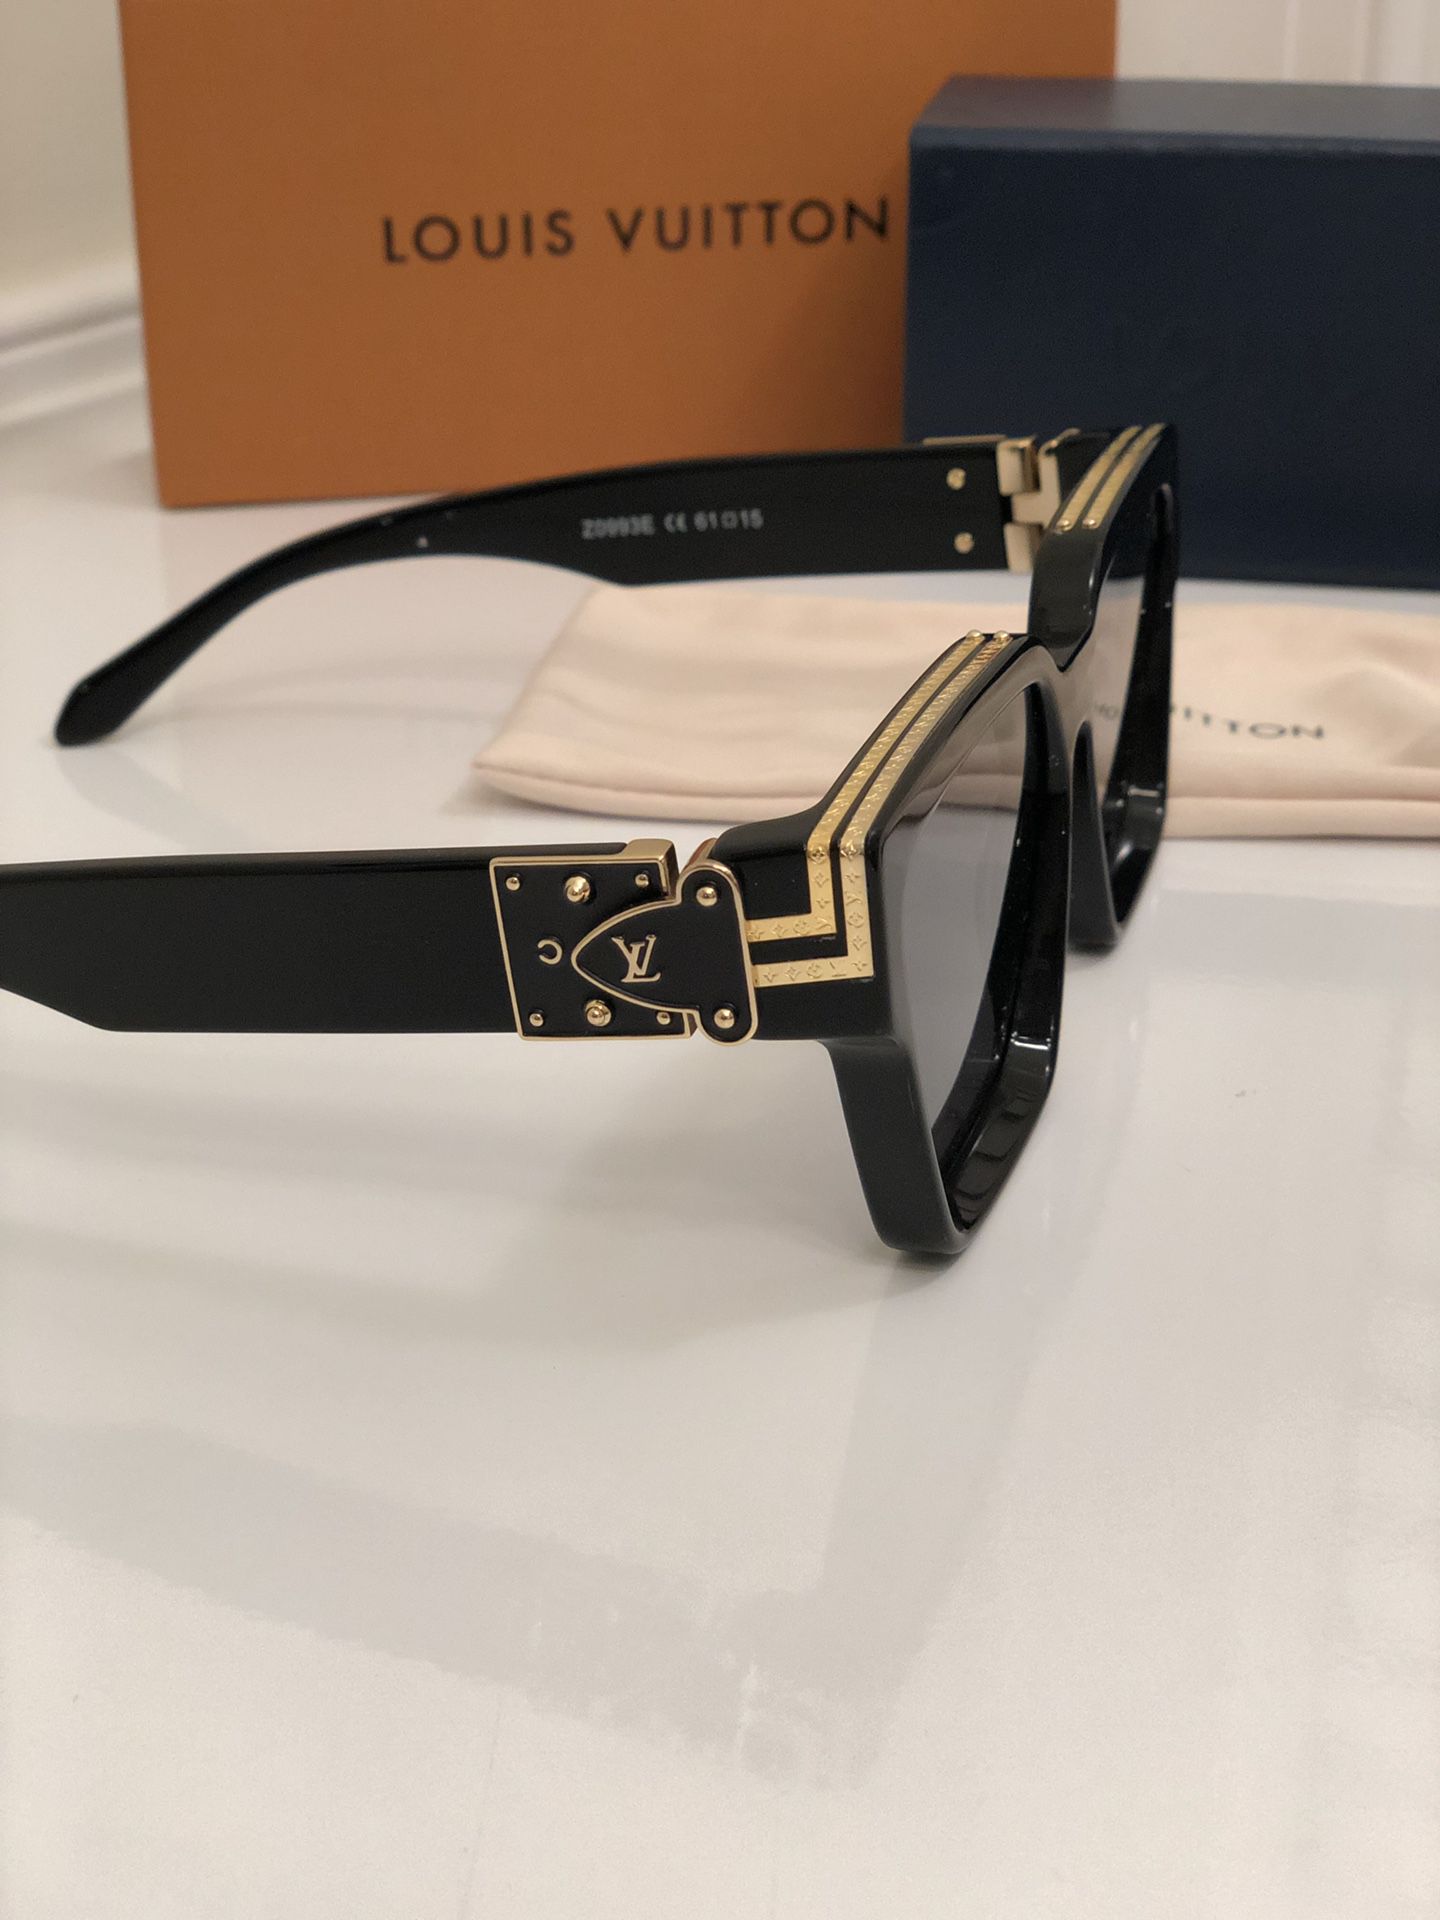 LV millionaire sunglasses for Sale in Coral Springs, FL - OfferUp